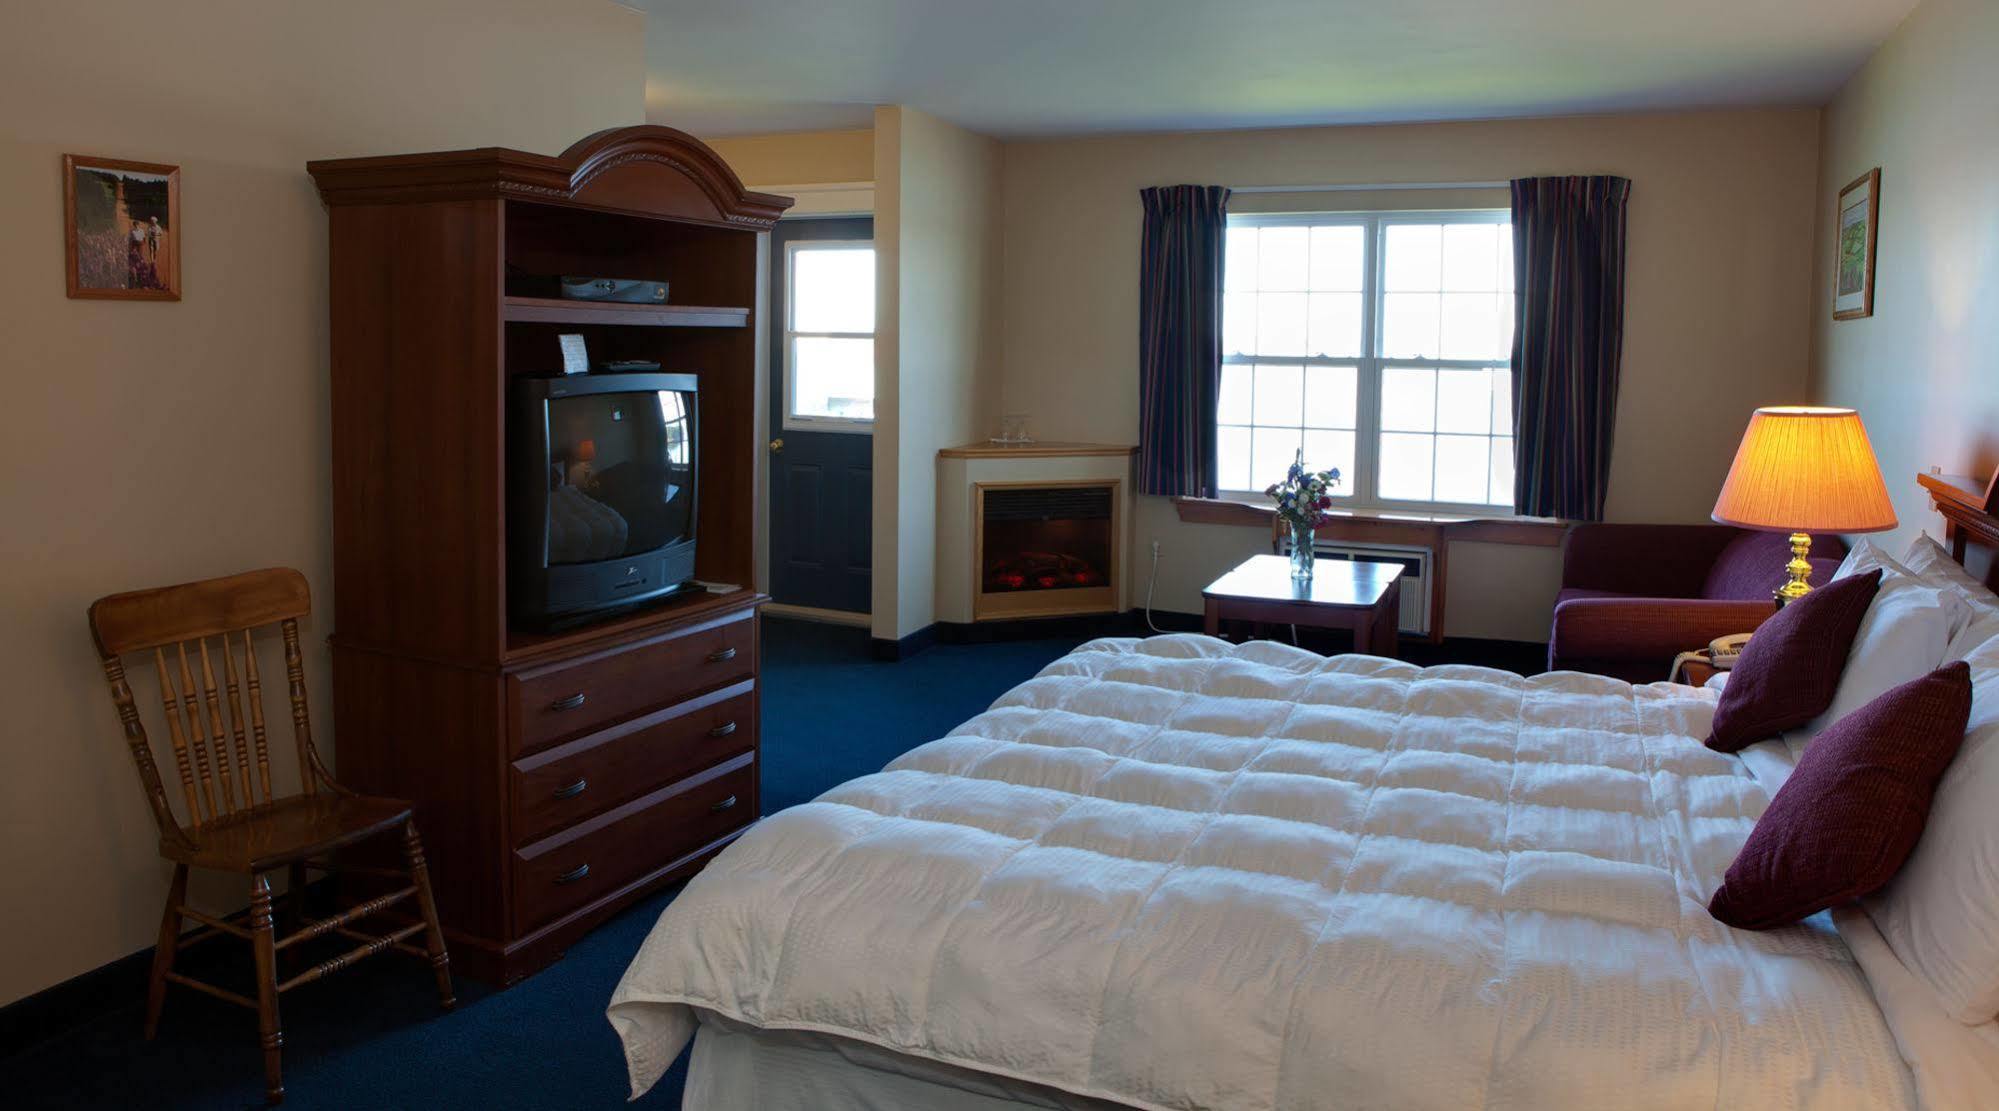 HOTEL INN AT THE PIER CAVENDISH 4* (Canada) - from US$ 124